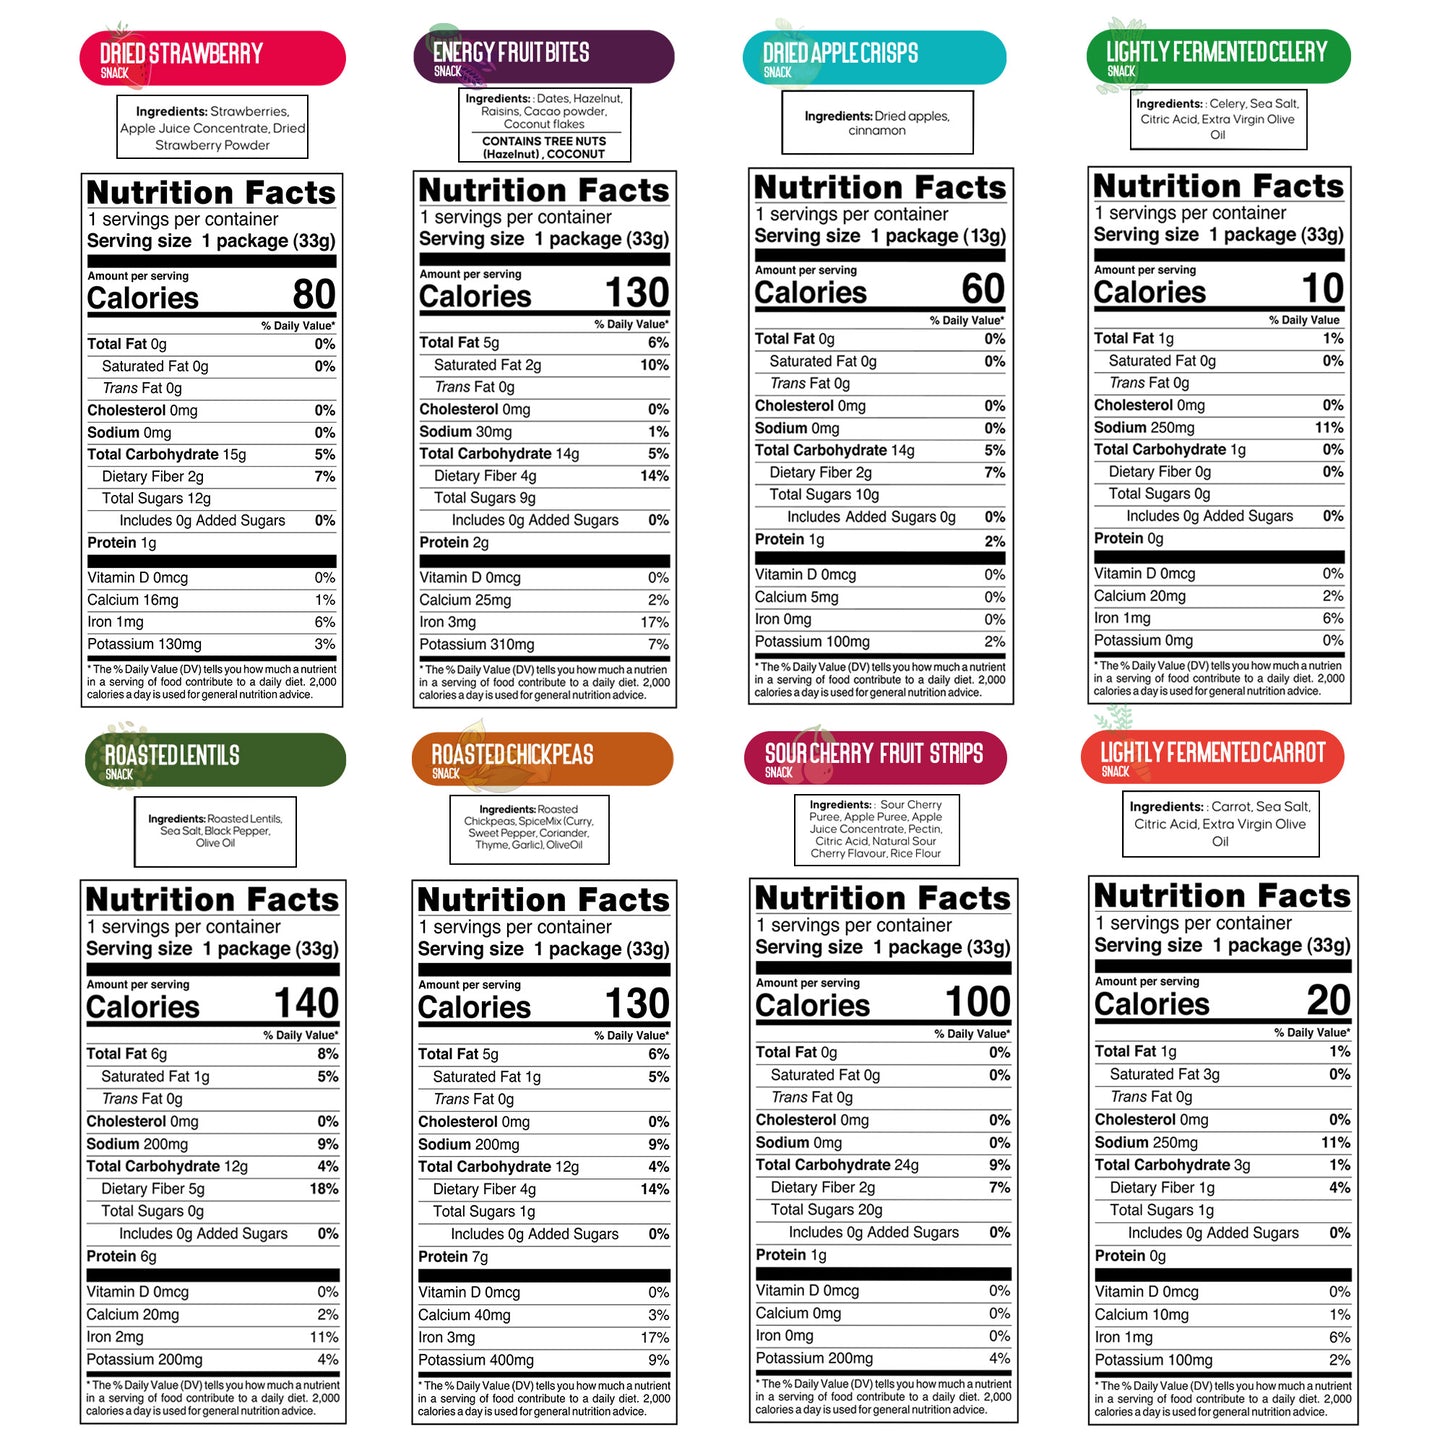 Nutruit Gourmet Mega Snack Box - 32 Individually Packed Vegan Snacks, Mystery Flavor, Gluten-Free, No Sugar Added, Non-GMO, High Fiber, Plant-Based Protein, Low Calorie, 15+ Delicious Flavors, Perfect Snack Gift Box for Health-Conscious Individuals 1.2oz